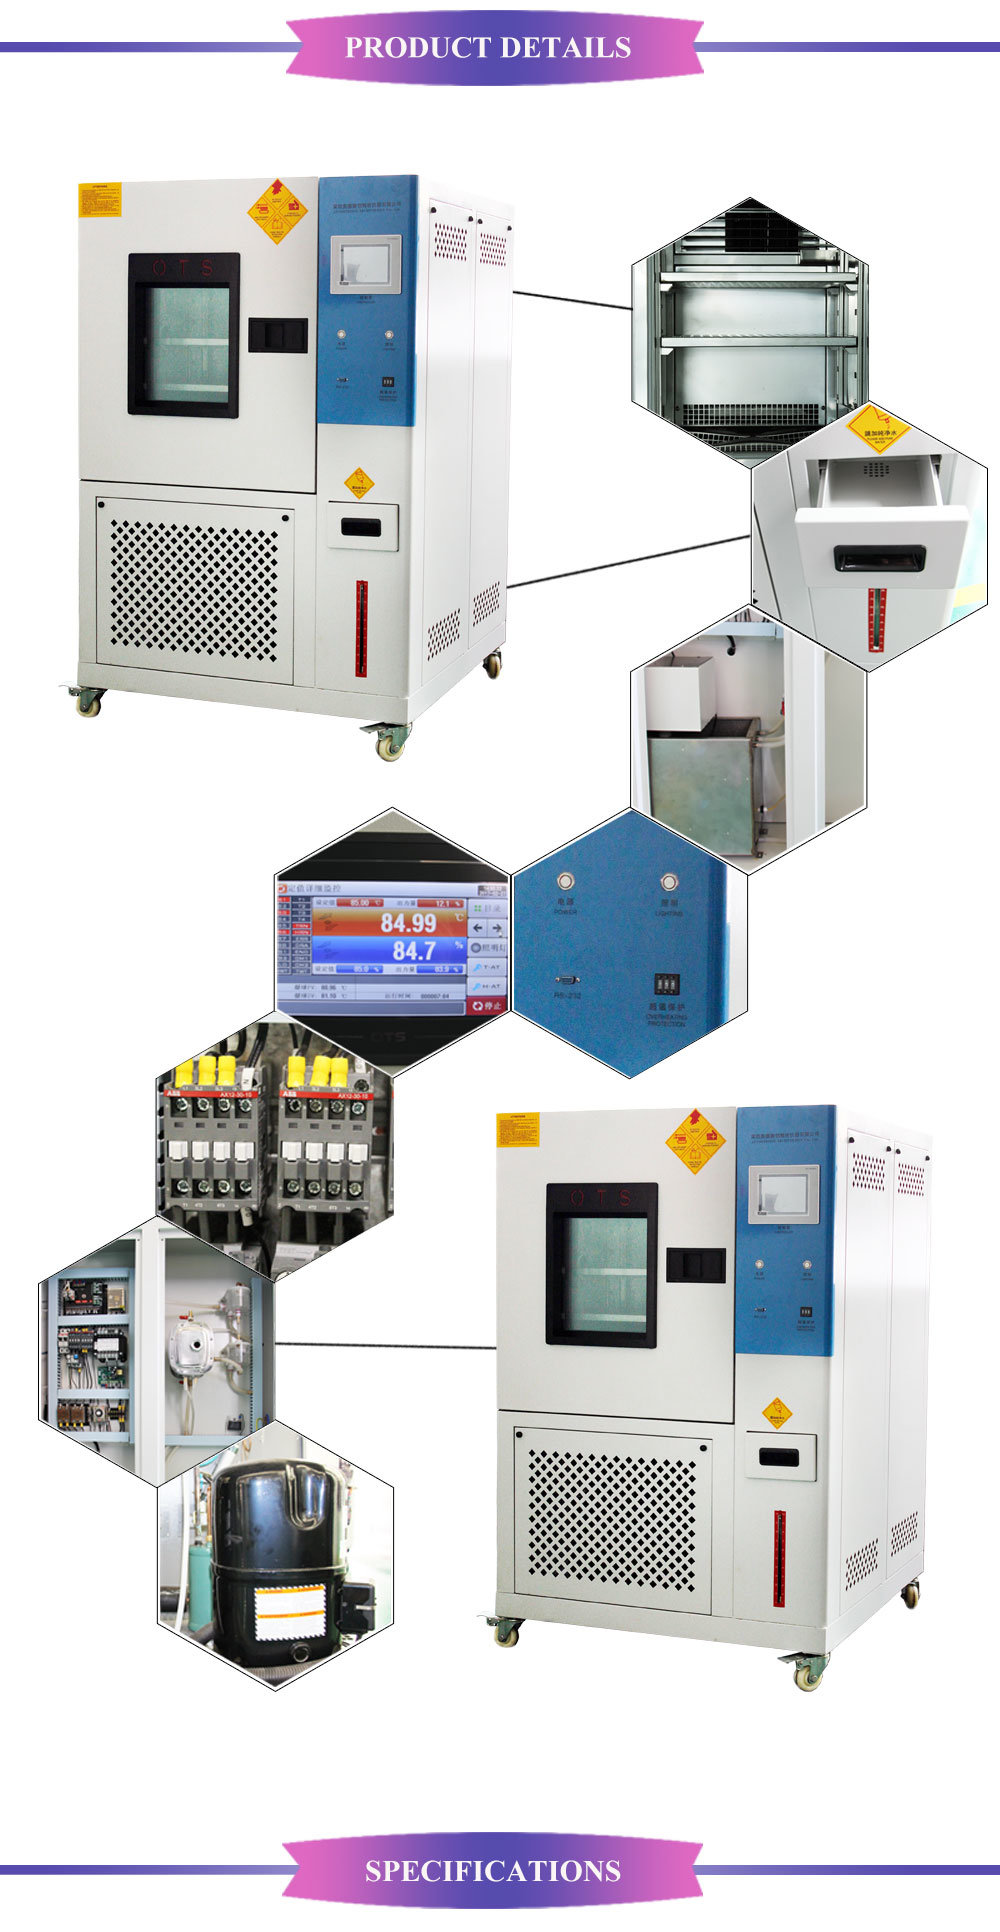 Quality Construction and Innovative Technology Environmental Test Chambers